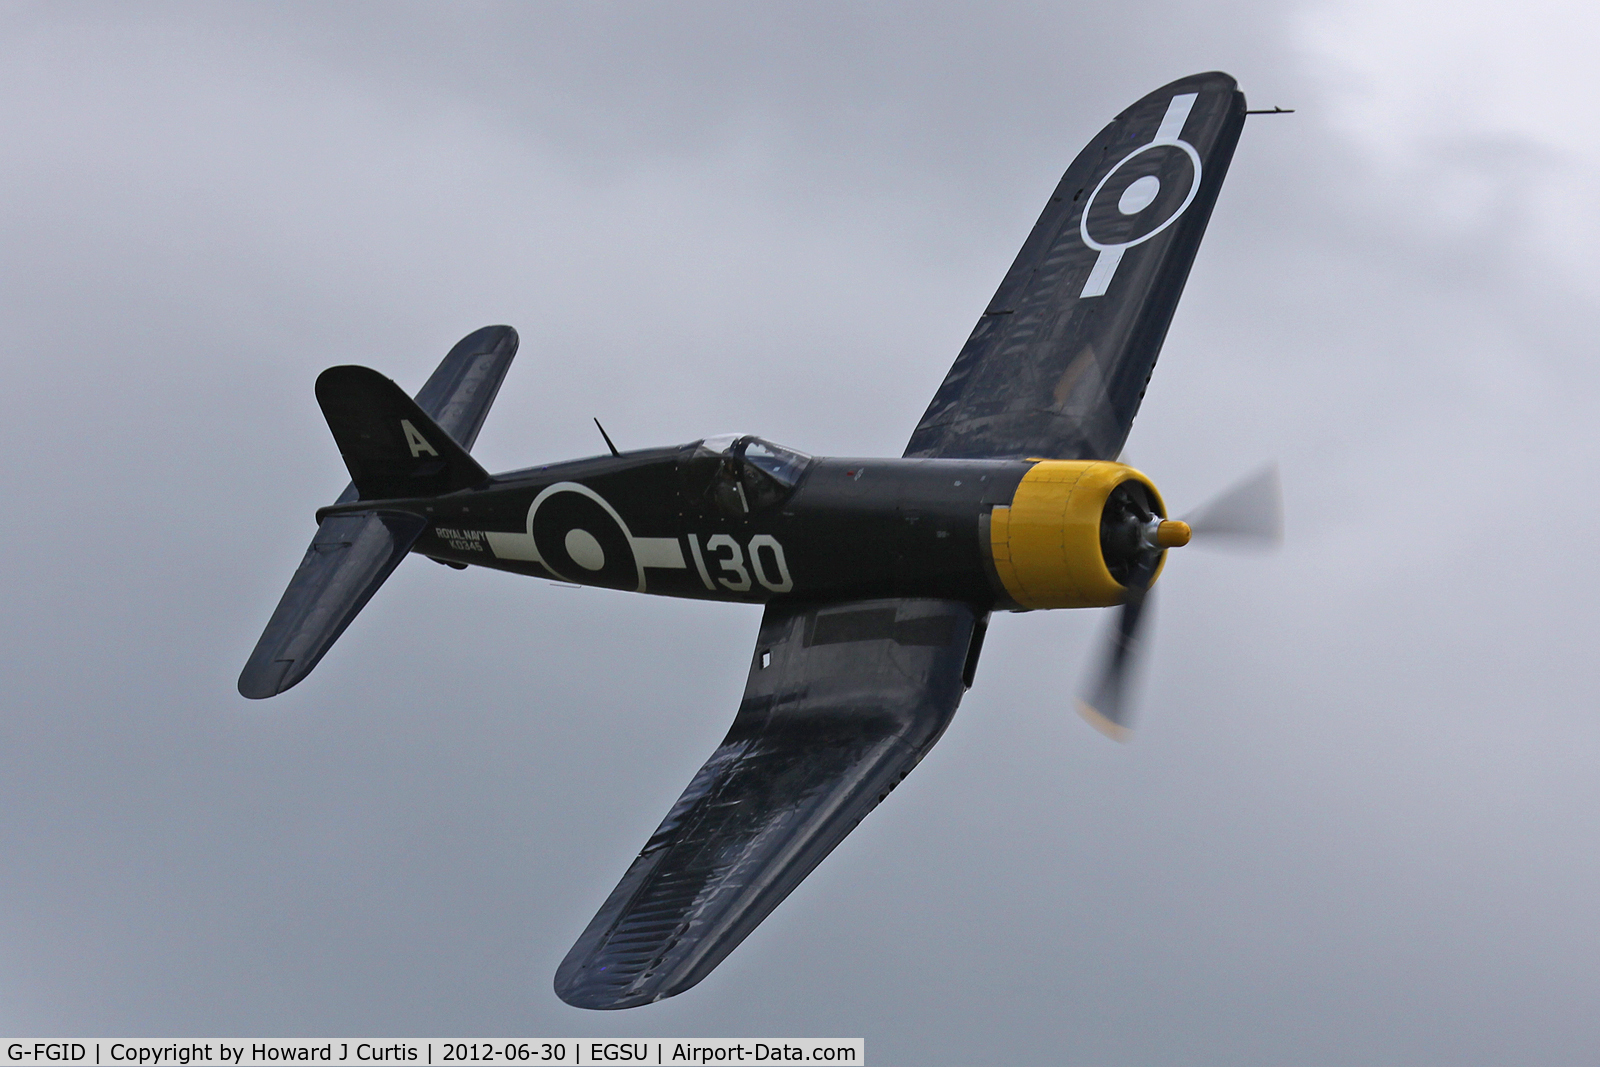 G-FGID, 1945 Goodyear FG-1D Corsair C/N 3111, At Flying Legends 2012. Painted in Royal Navy colours as KD345.